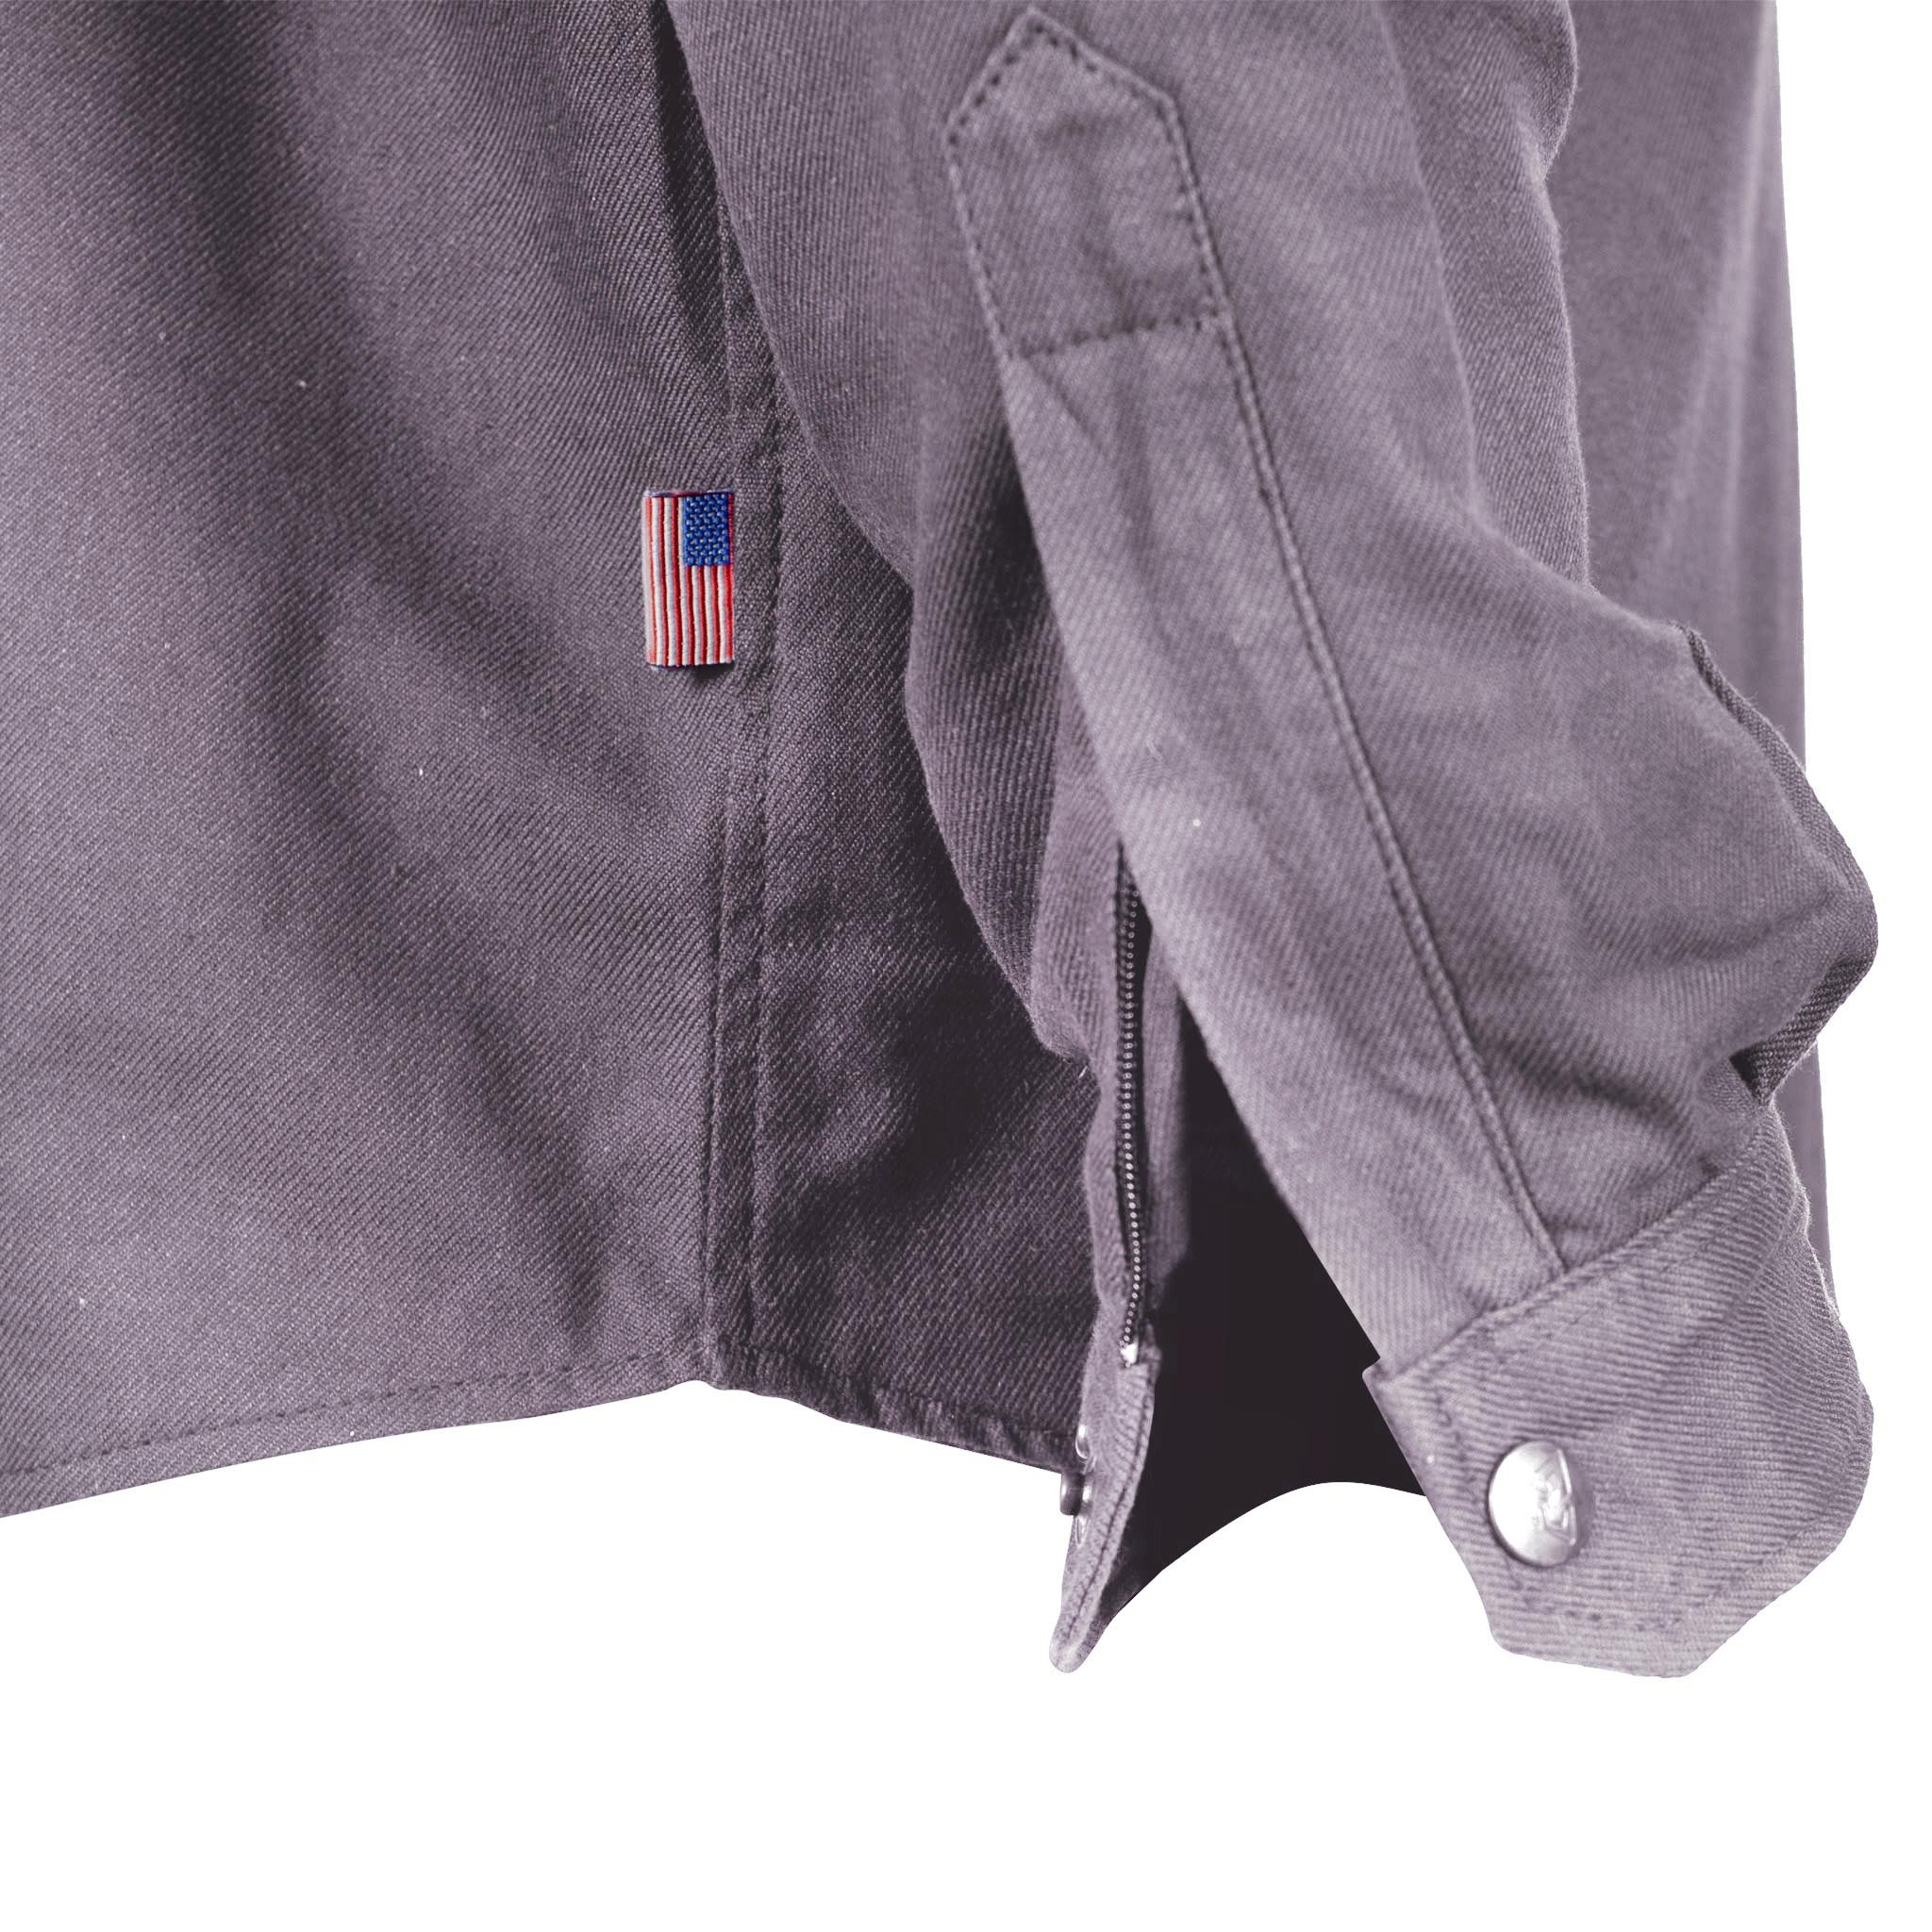 Protective Flannel Shirt - Grey Solid